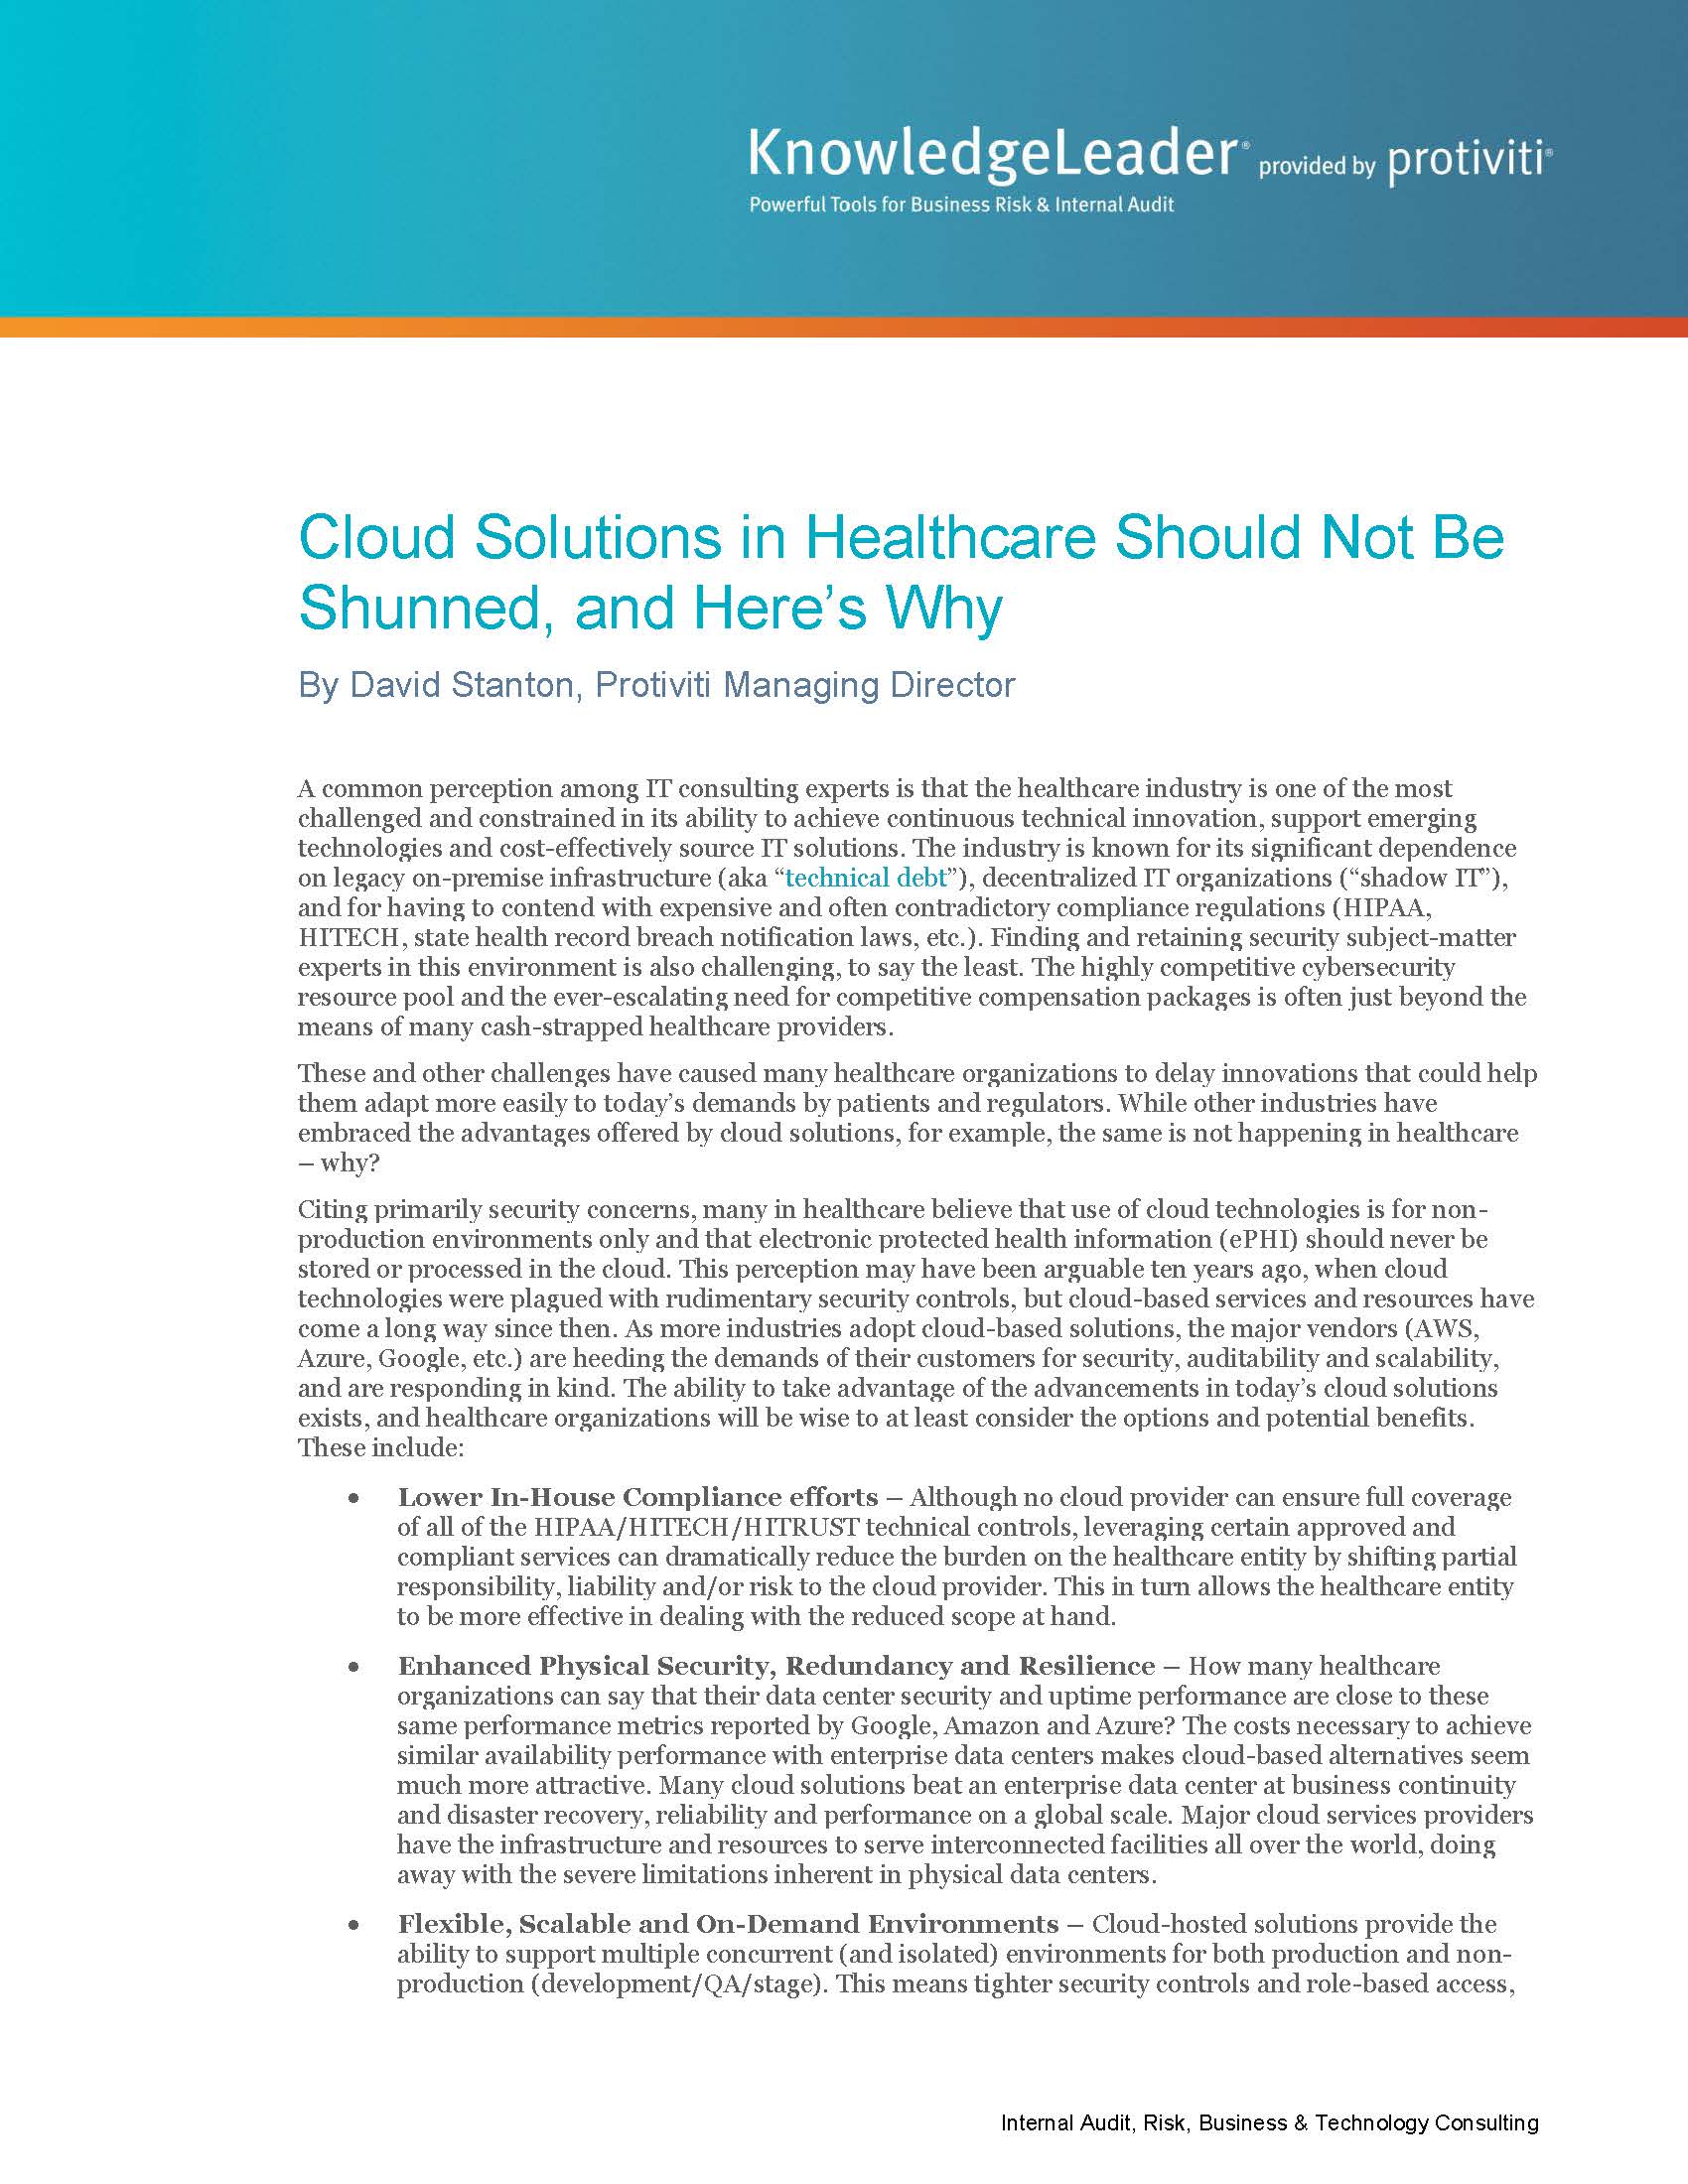 Screenshot of the first page of Cloud Solutions in Healthcare Should Not Be Shunned, and Here’s Why